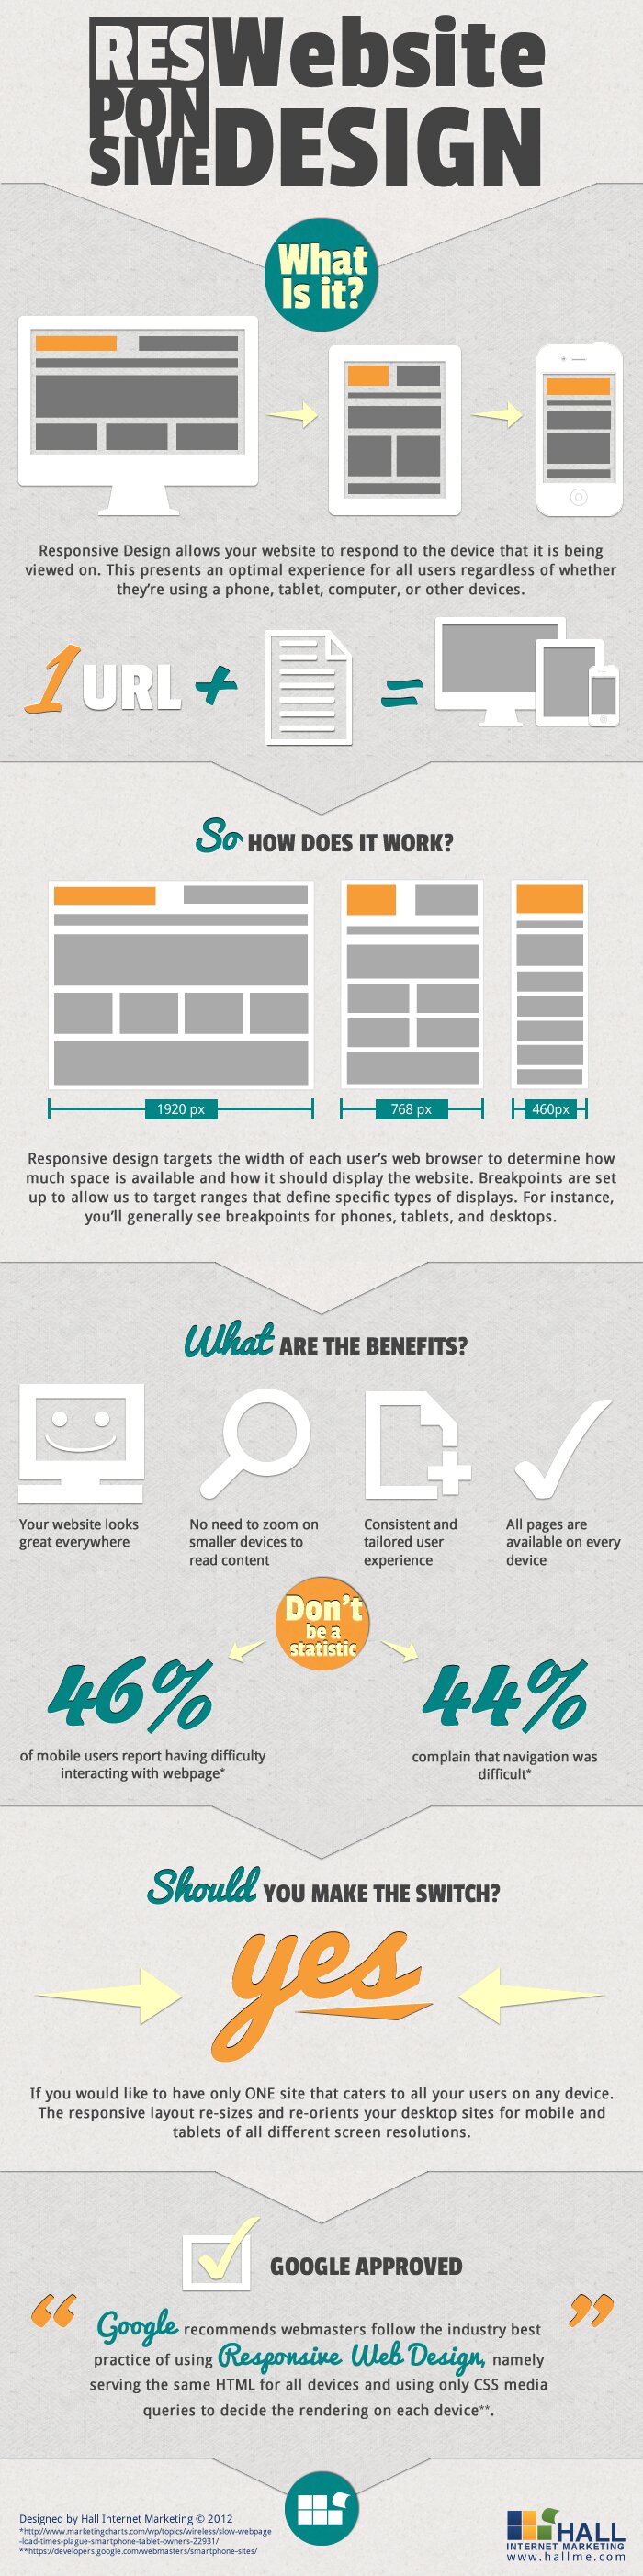 The bigger version of Responsive Website Design – What is it?